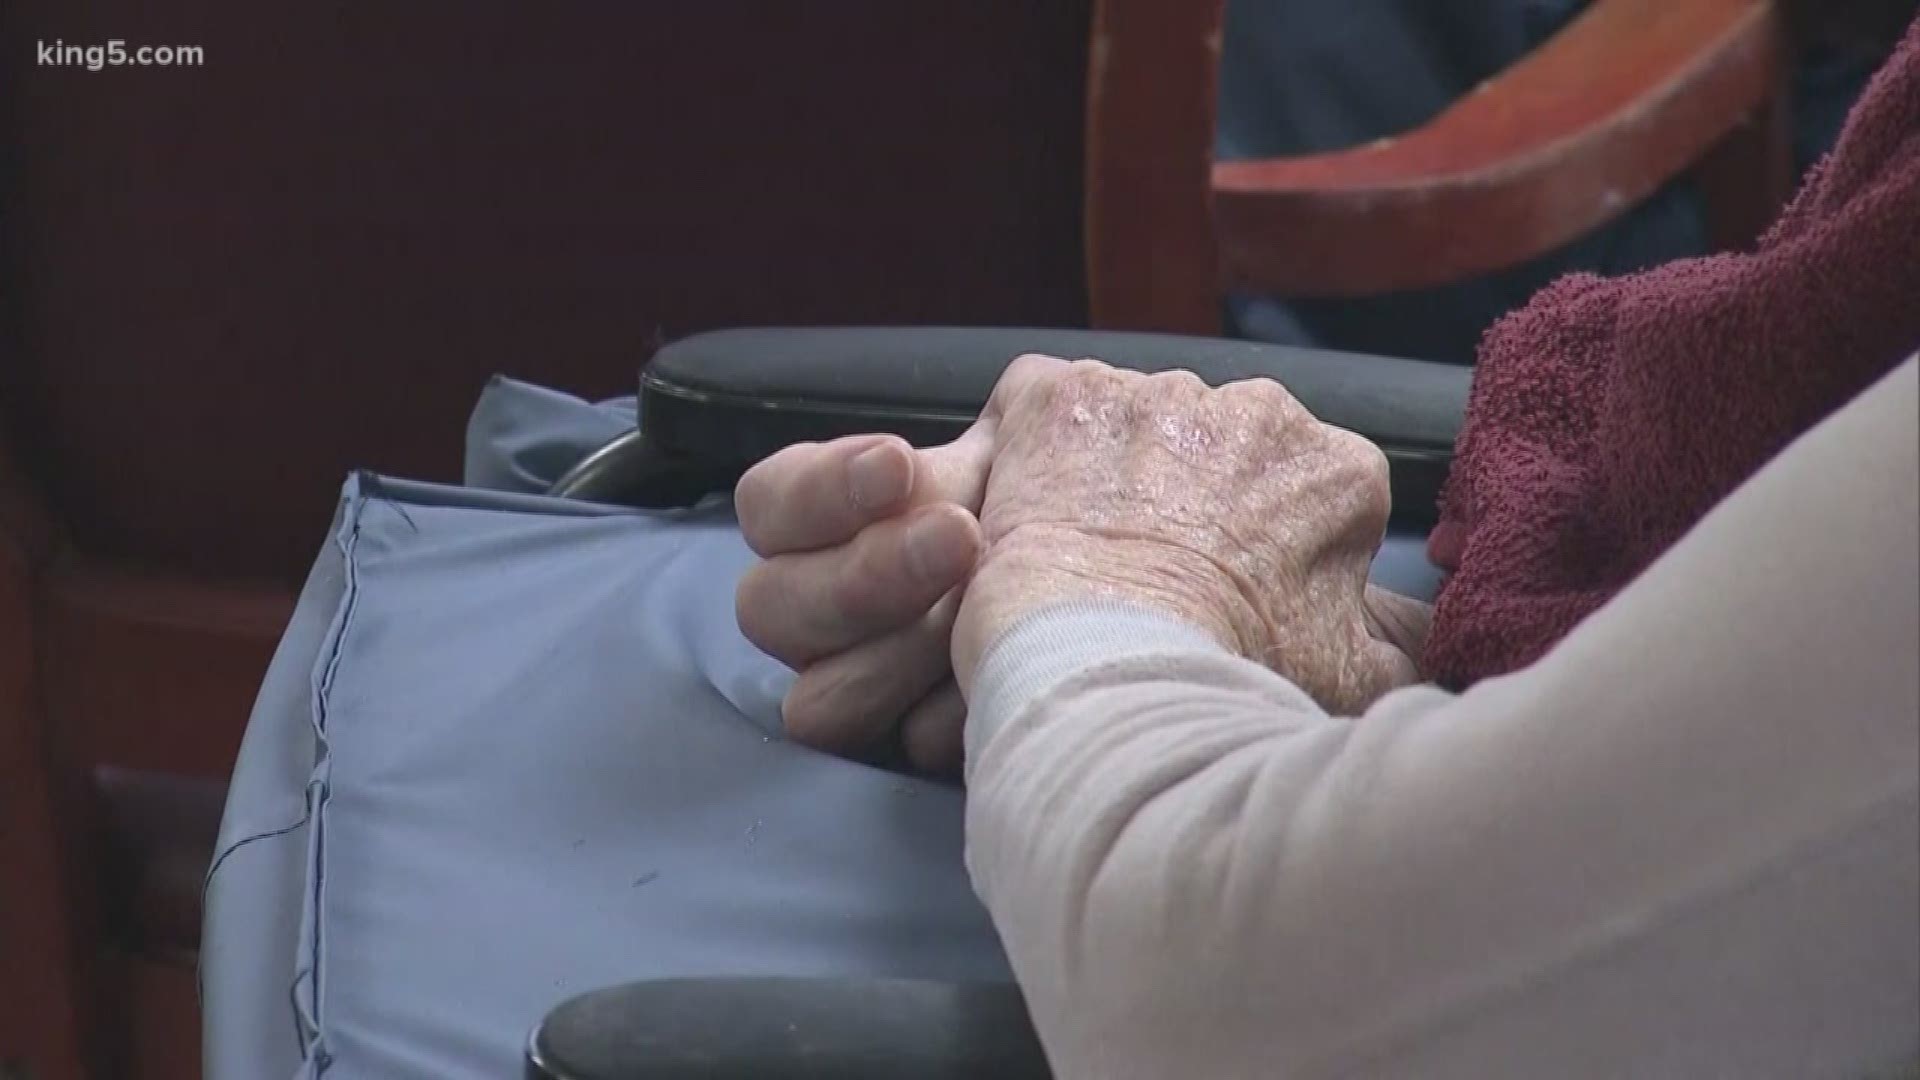 Governor Inslee signed the Long-Term Care Trust Act, making Washington the only state in the U.S with an employee paid long-term care benefit program. In just a few years, most Washington employees will begin paying into the fund. KING 5's Kalie Greenberg explains how this will work, and how you will benefit.